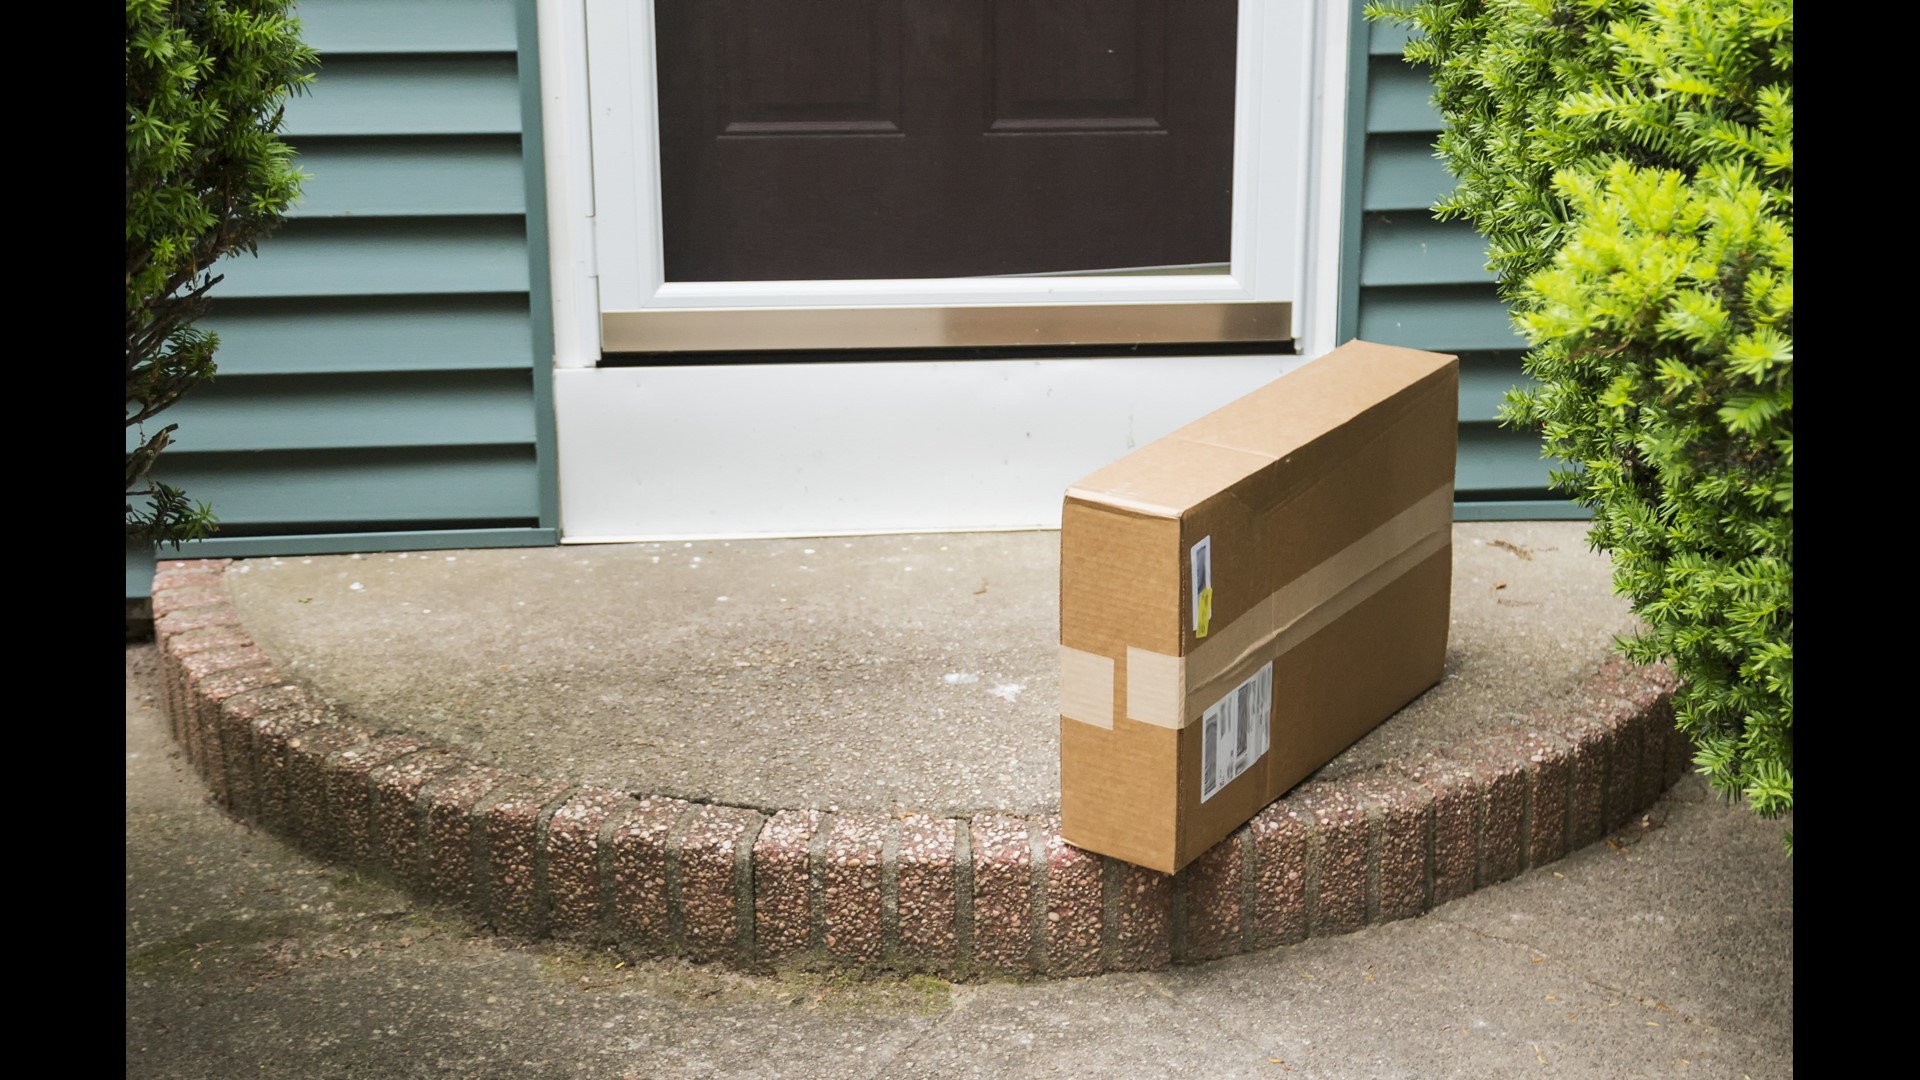 Some porch pirates are even following mail trucks to steal packages.